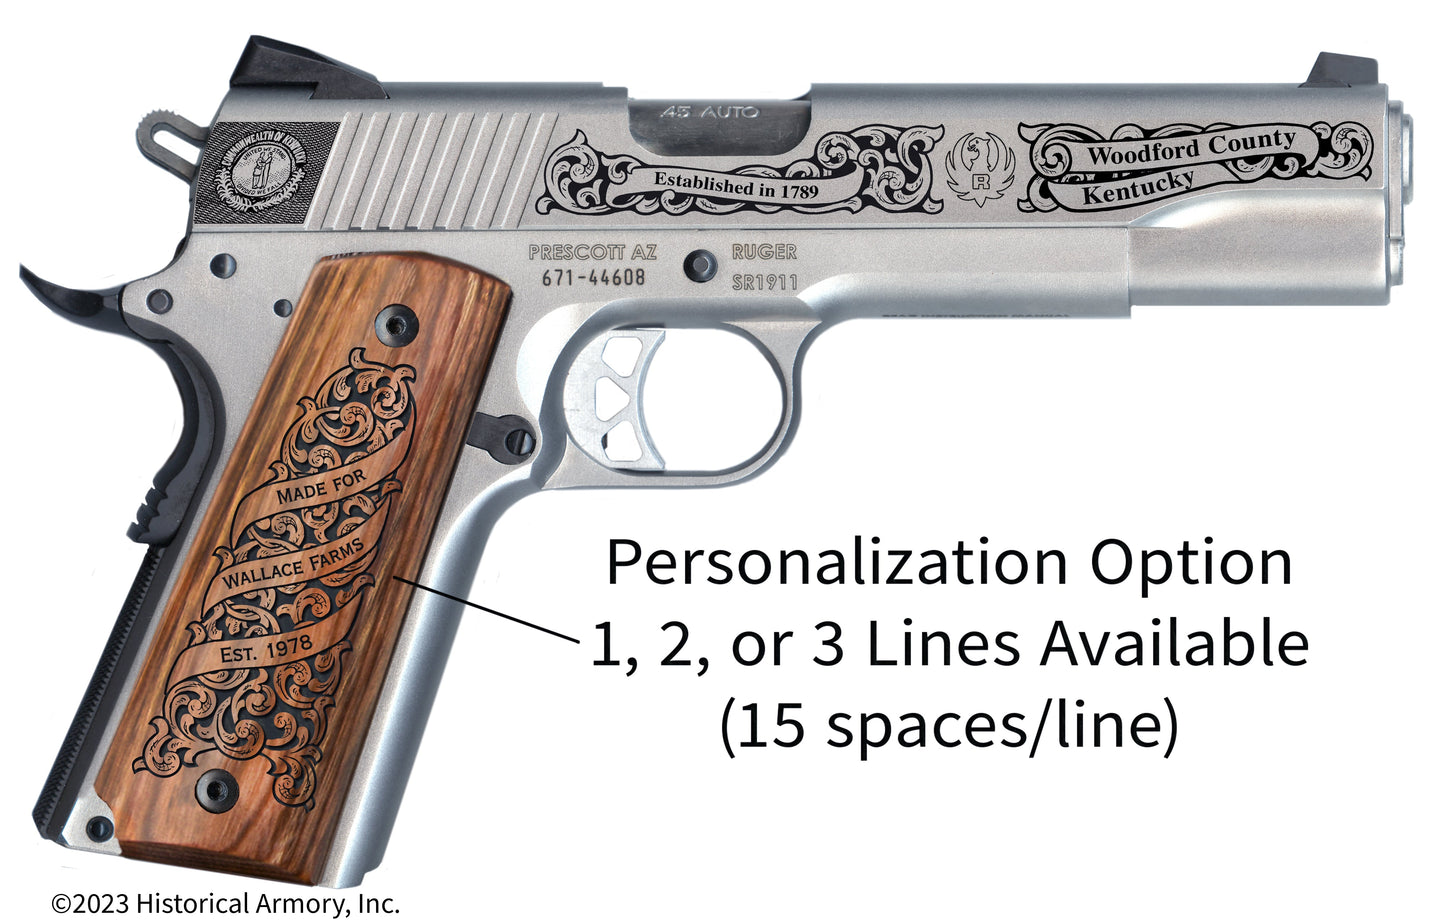 Woodford County Kentucky Personalized Engraved .45 Auto Ruger 1911